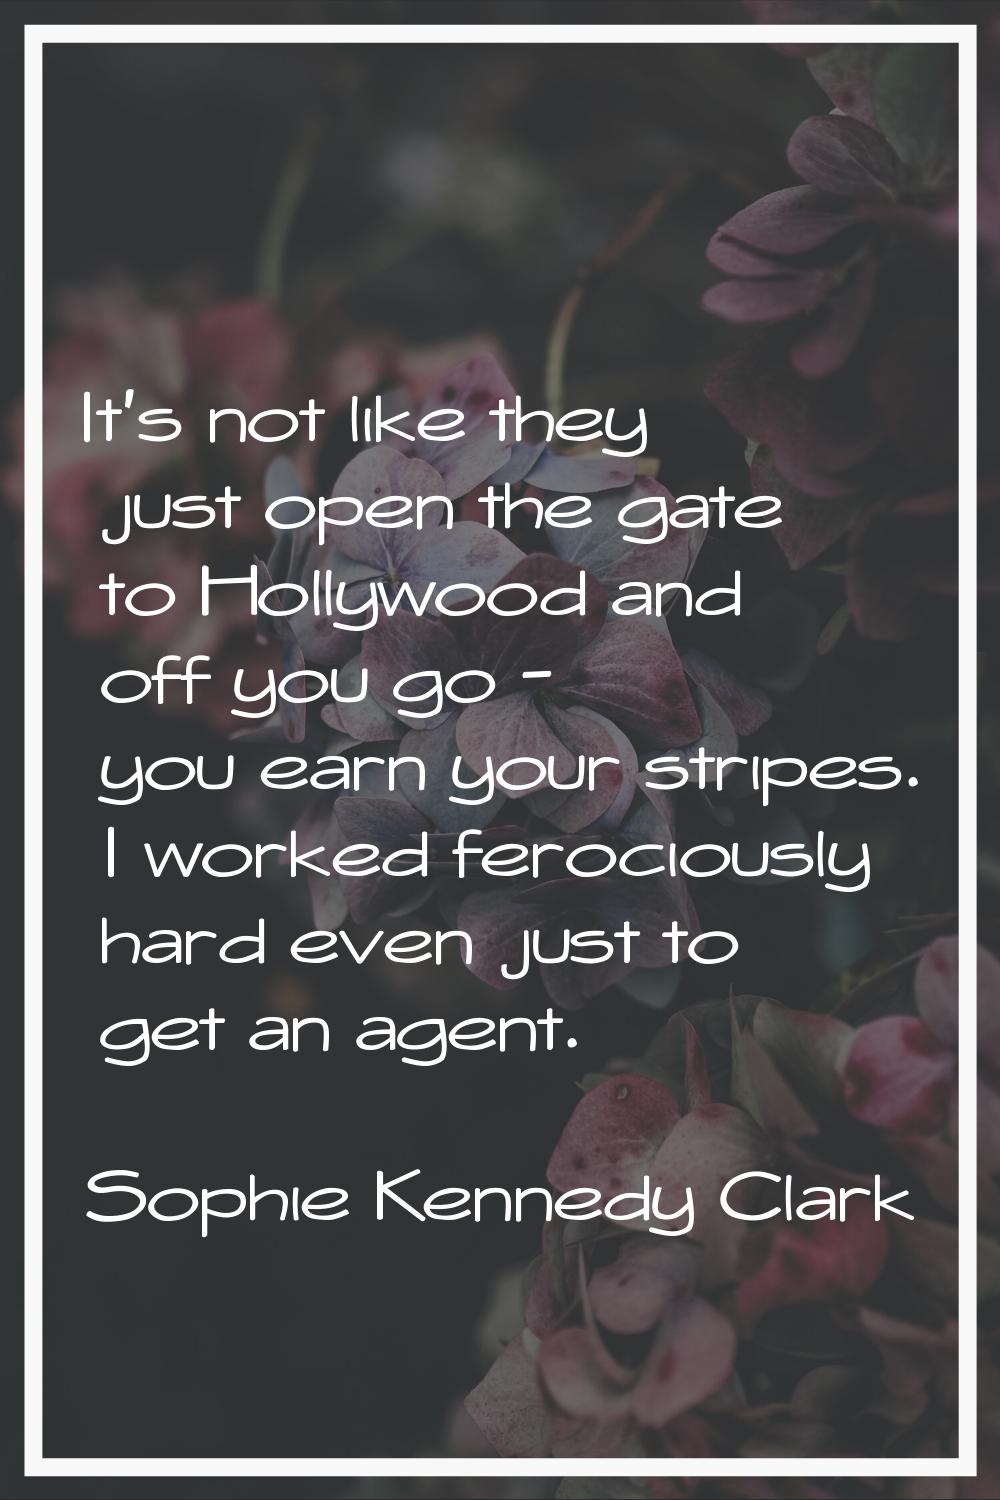 It's not like they just open the gate to Hollywood and off you go - you earn your stripes. I worked